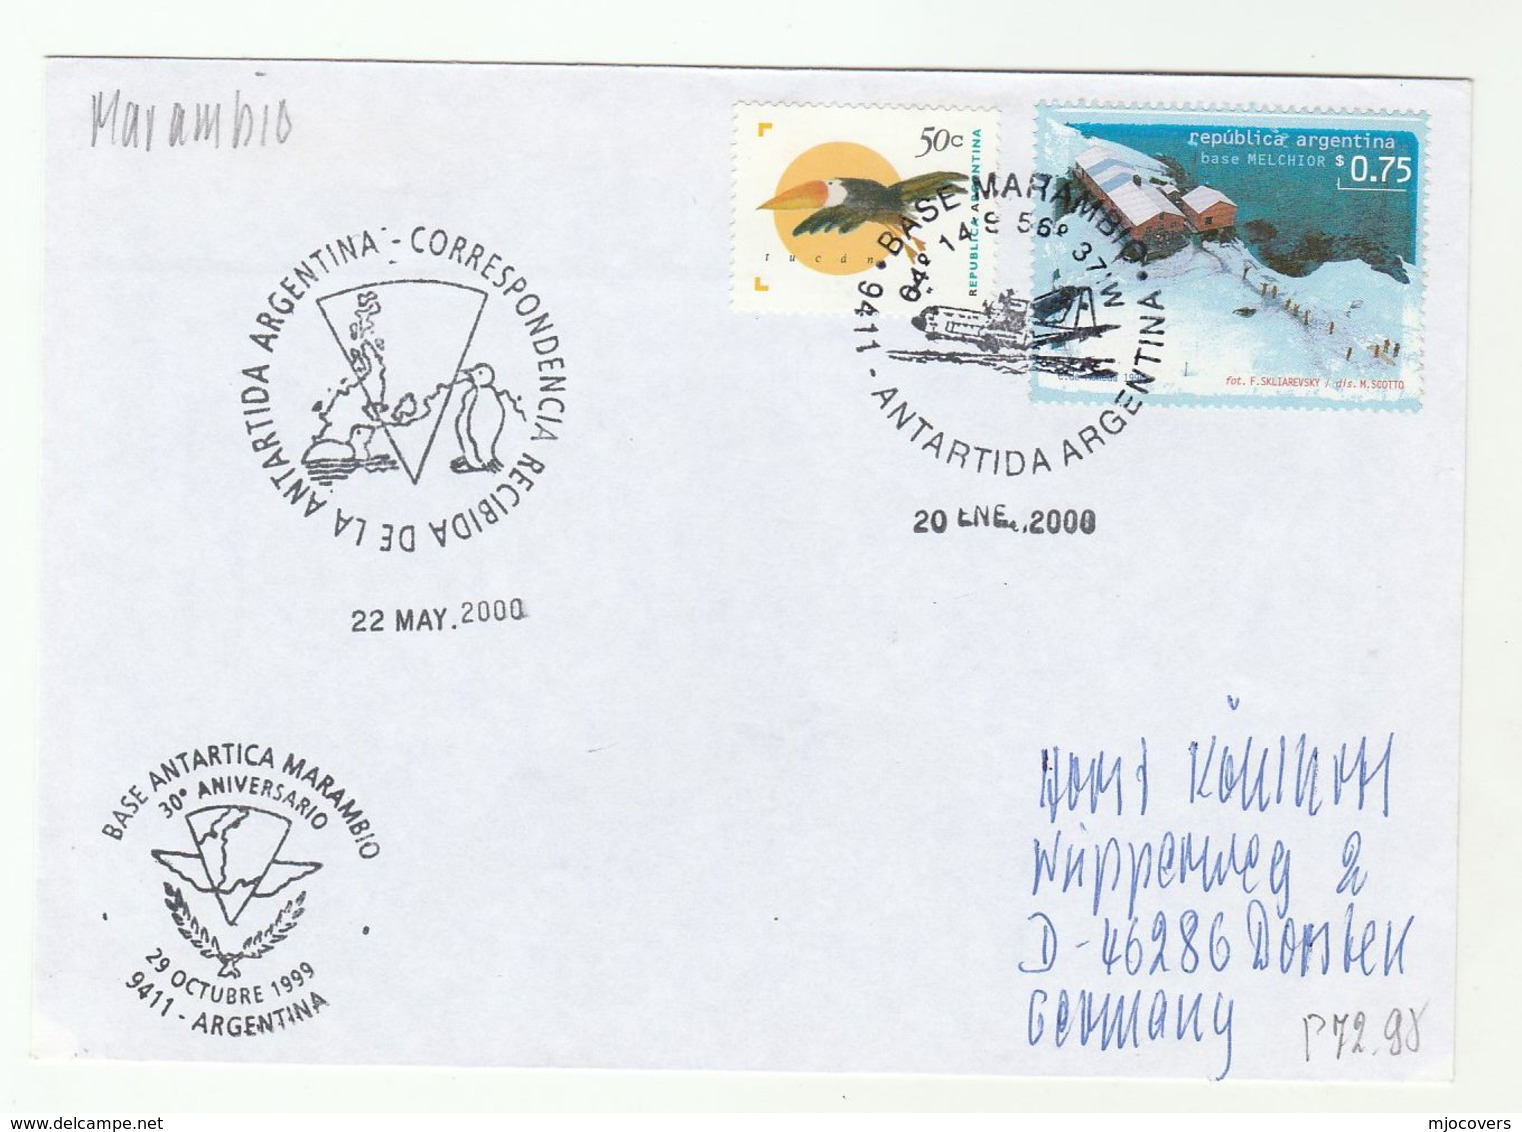 2000 Antarctic BASE MARAMBIO ARGENTINIAN POLAR COVER  Argentina Flight Aviation Stamps Bird - Research Stations